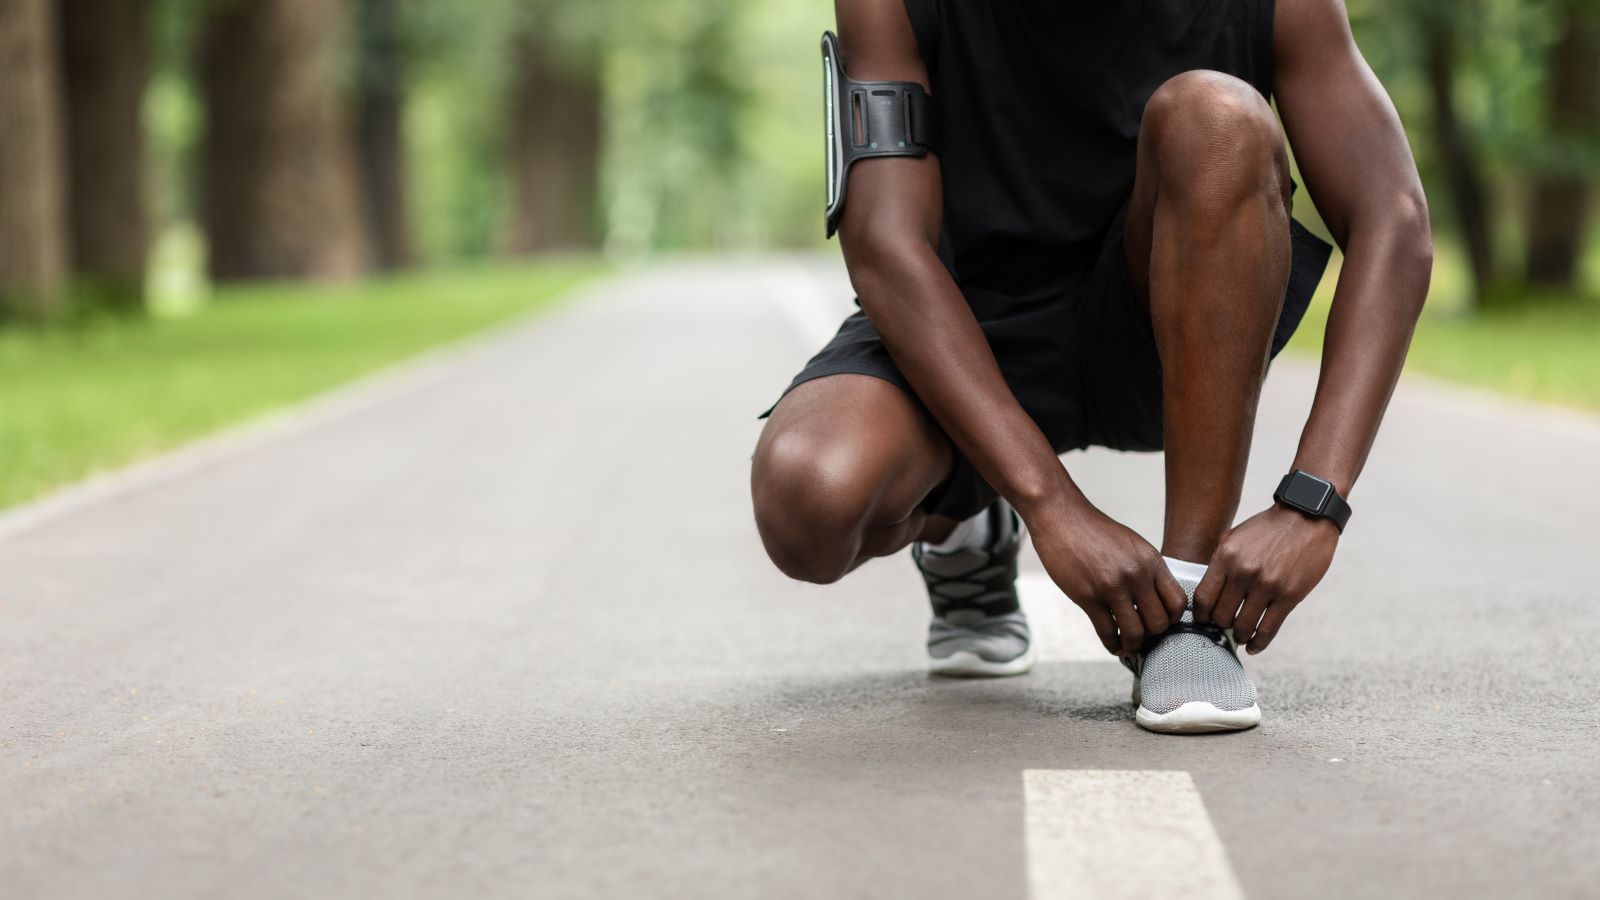 Follow These 3 Steps to Prepare For Marathon Training